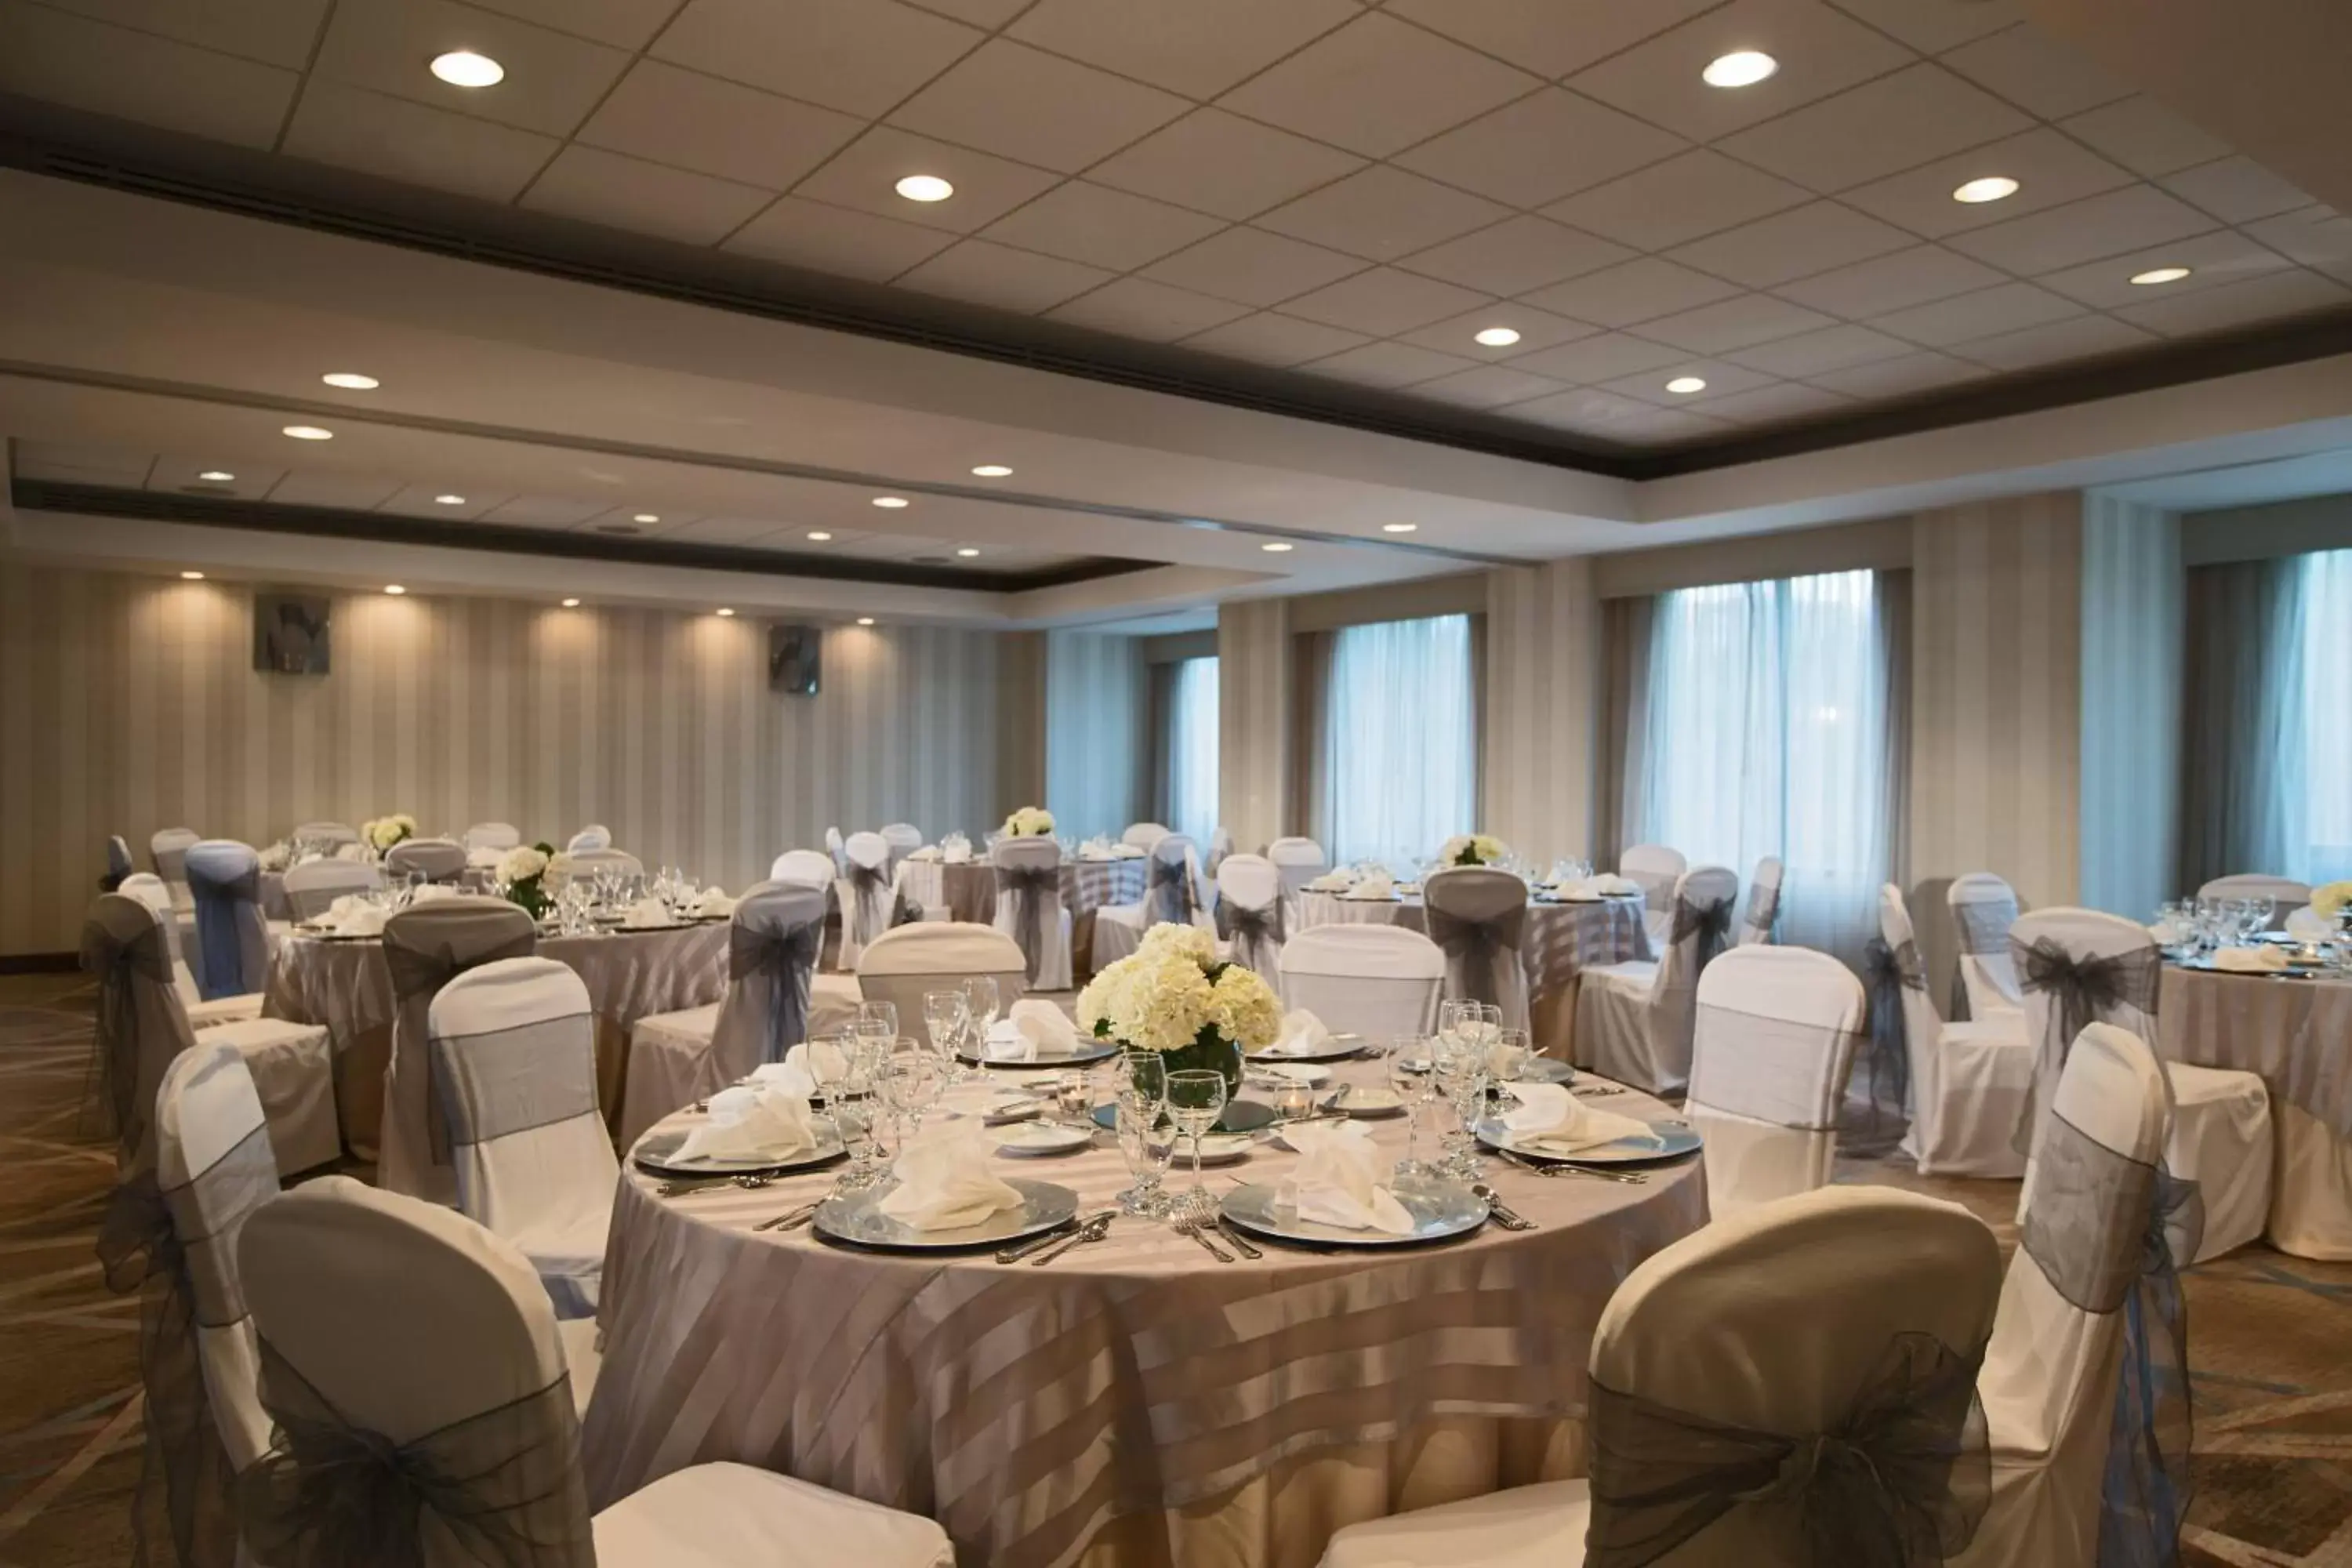 Meeting/conference room, Banquet Facilities in Washington Dulles Marriott Suites